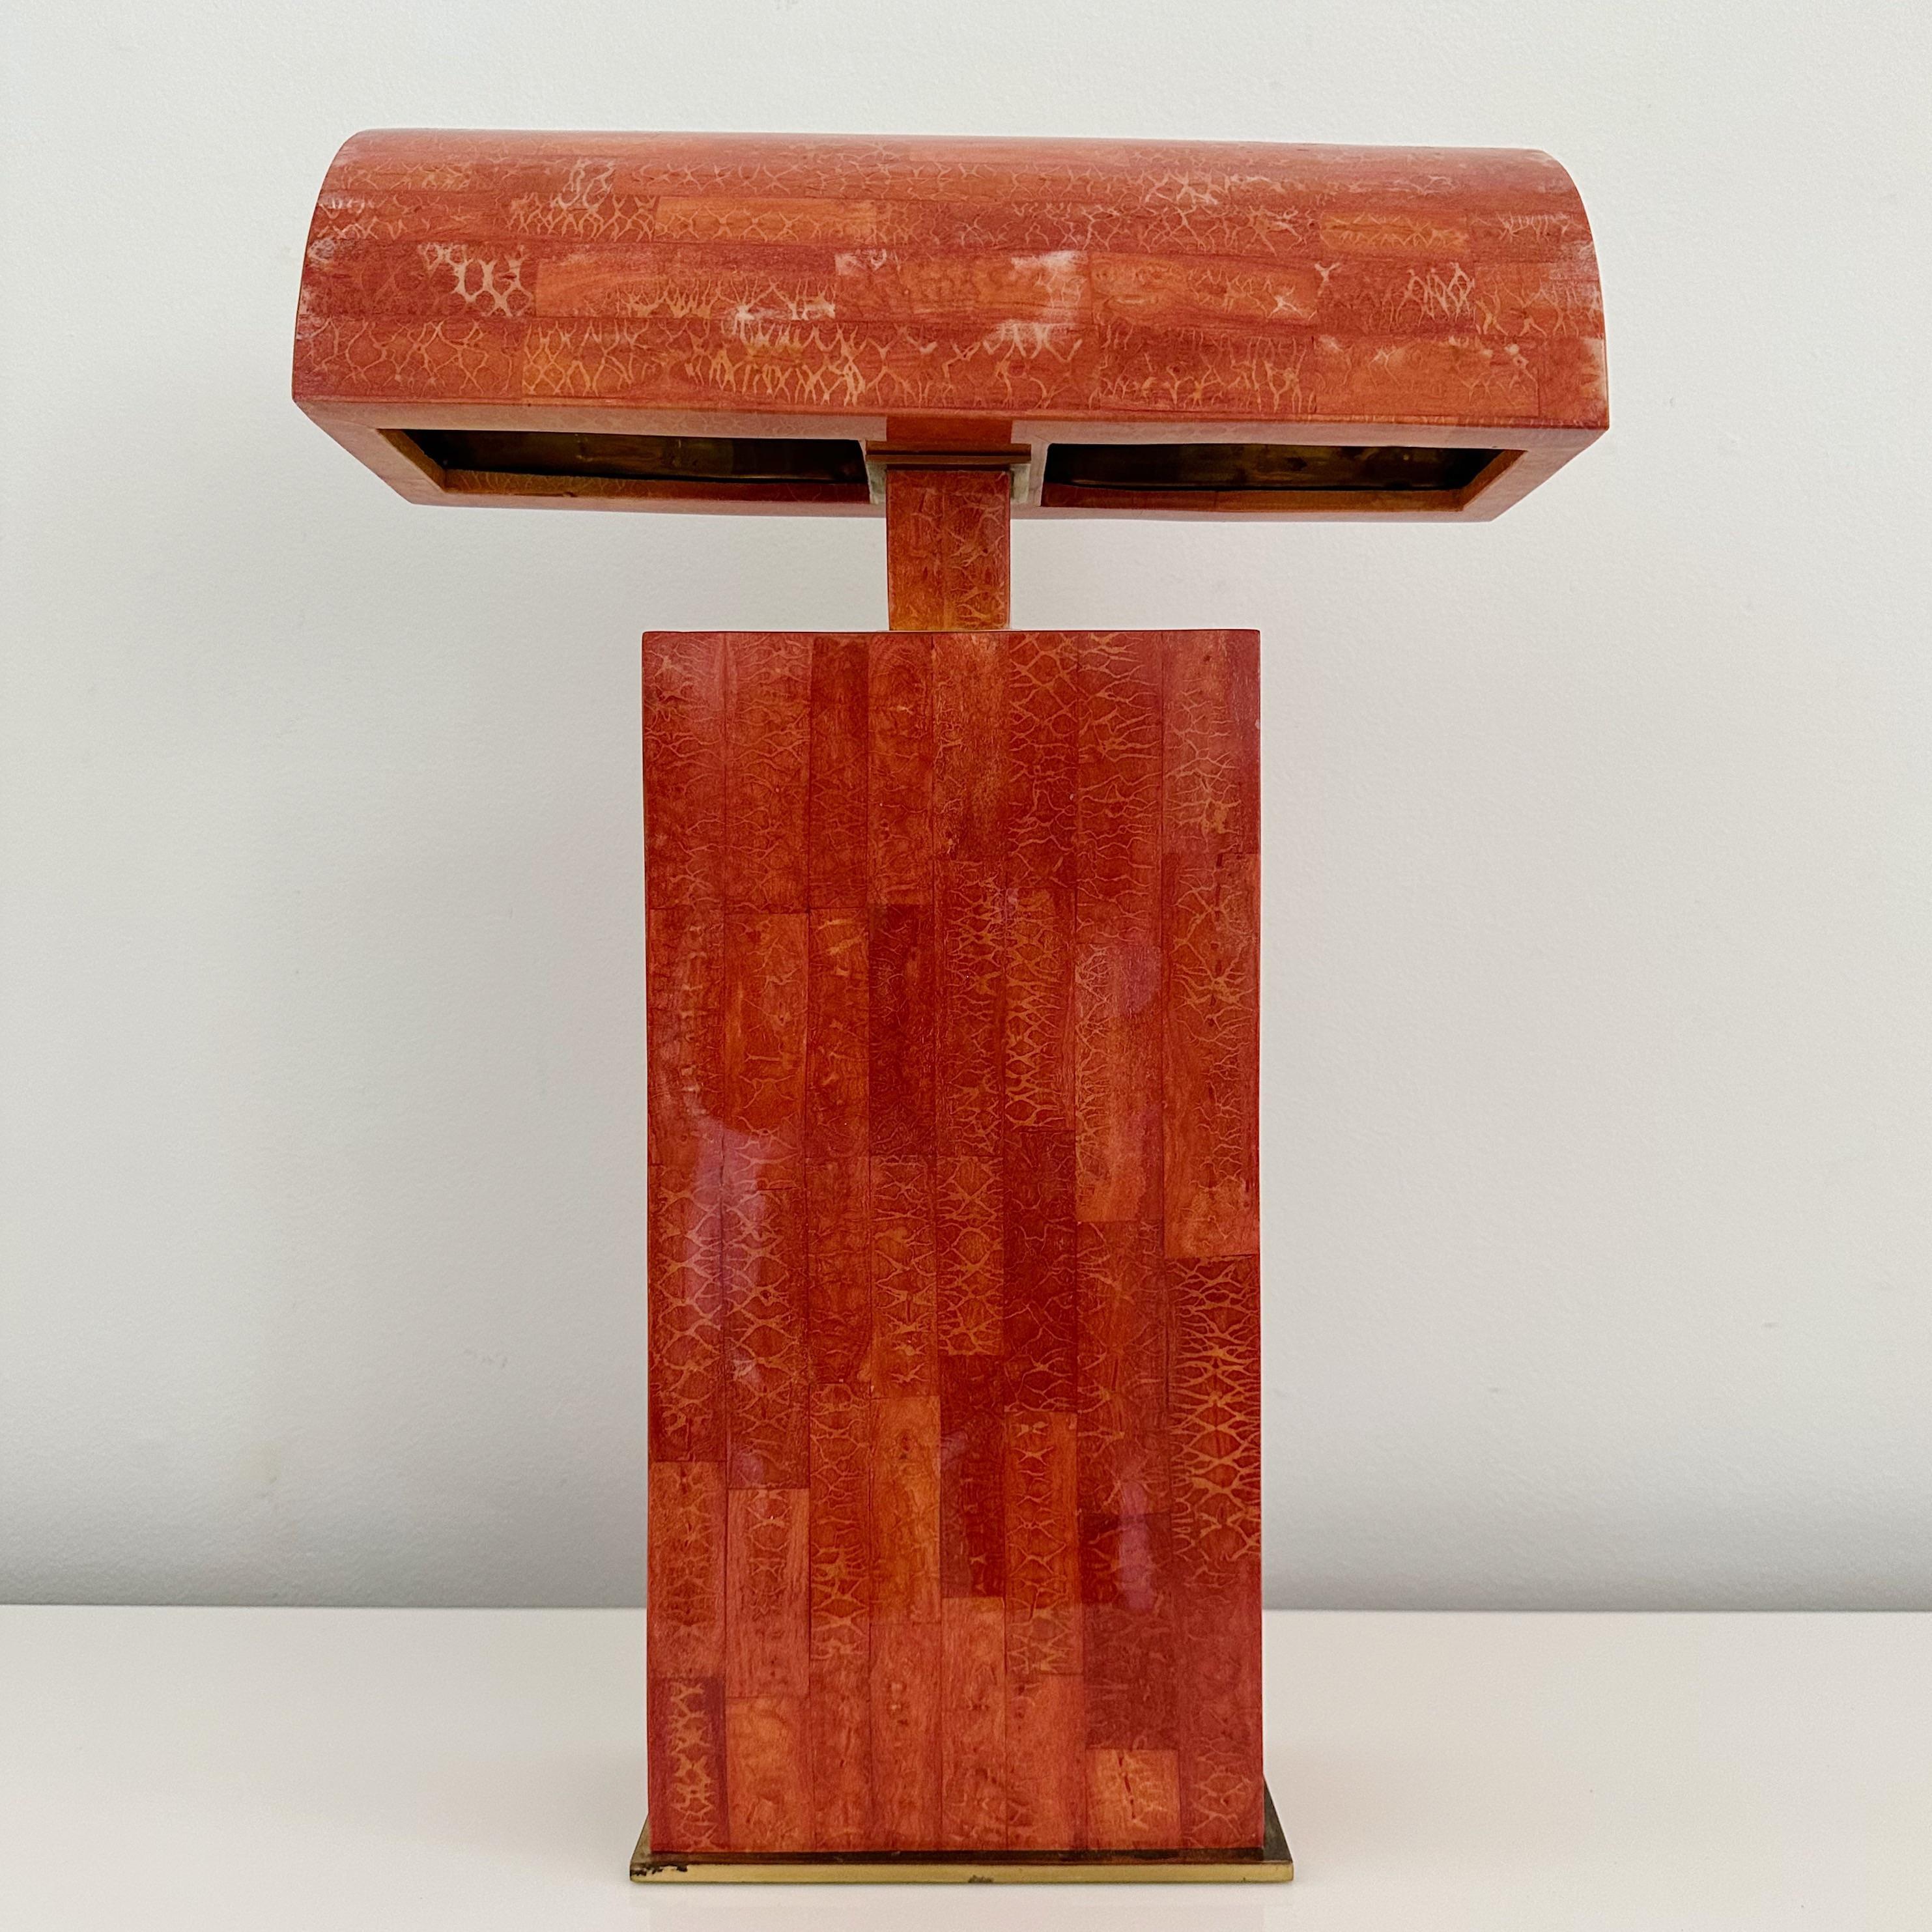 Karl Springer, coral sculpture desk lamp, 24 x 16.5 x 5.5 inches, brass trim and lacquered red coral, sculpture desk lamp made in the Philippines by Paul Maitland Smith for Karl Springer Studio in the 1980s. The attached shade is lined in brass.